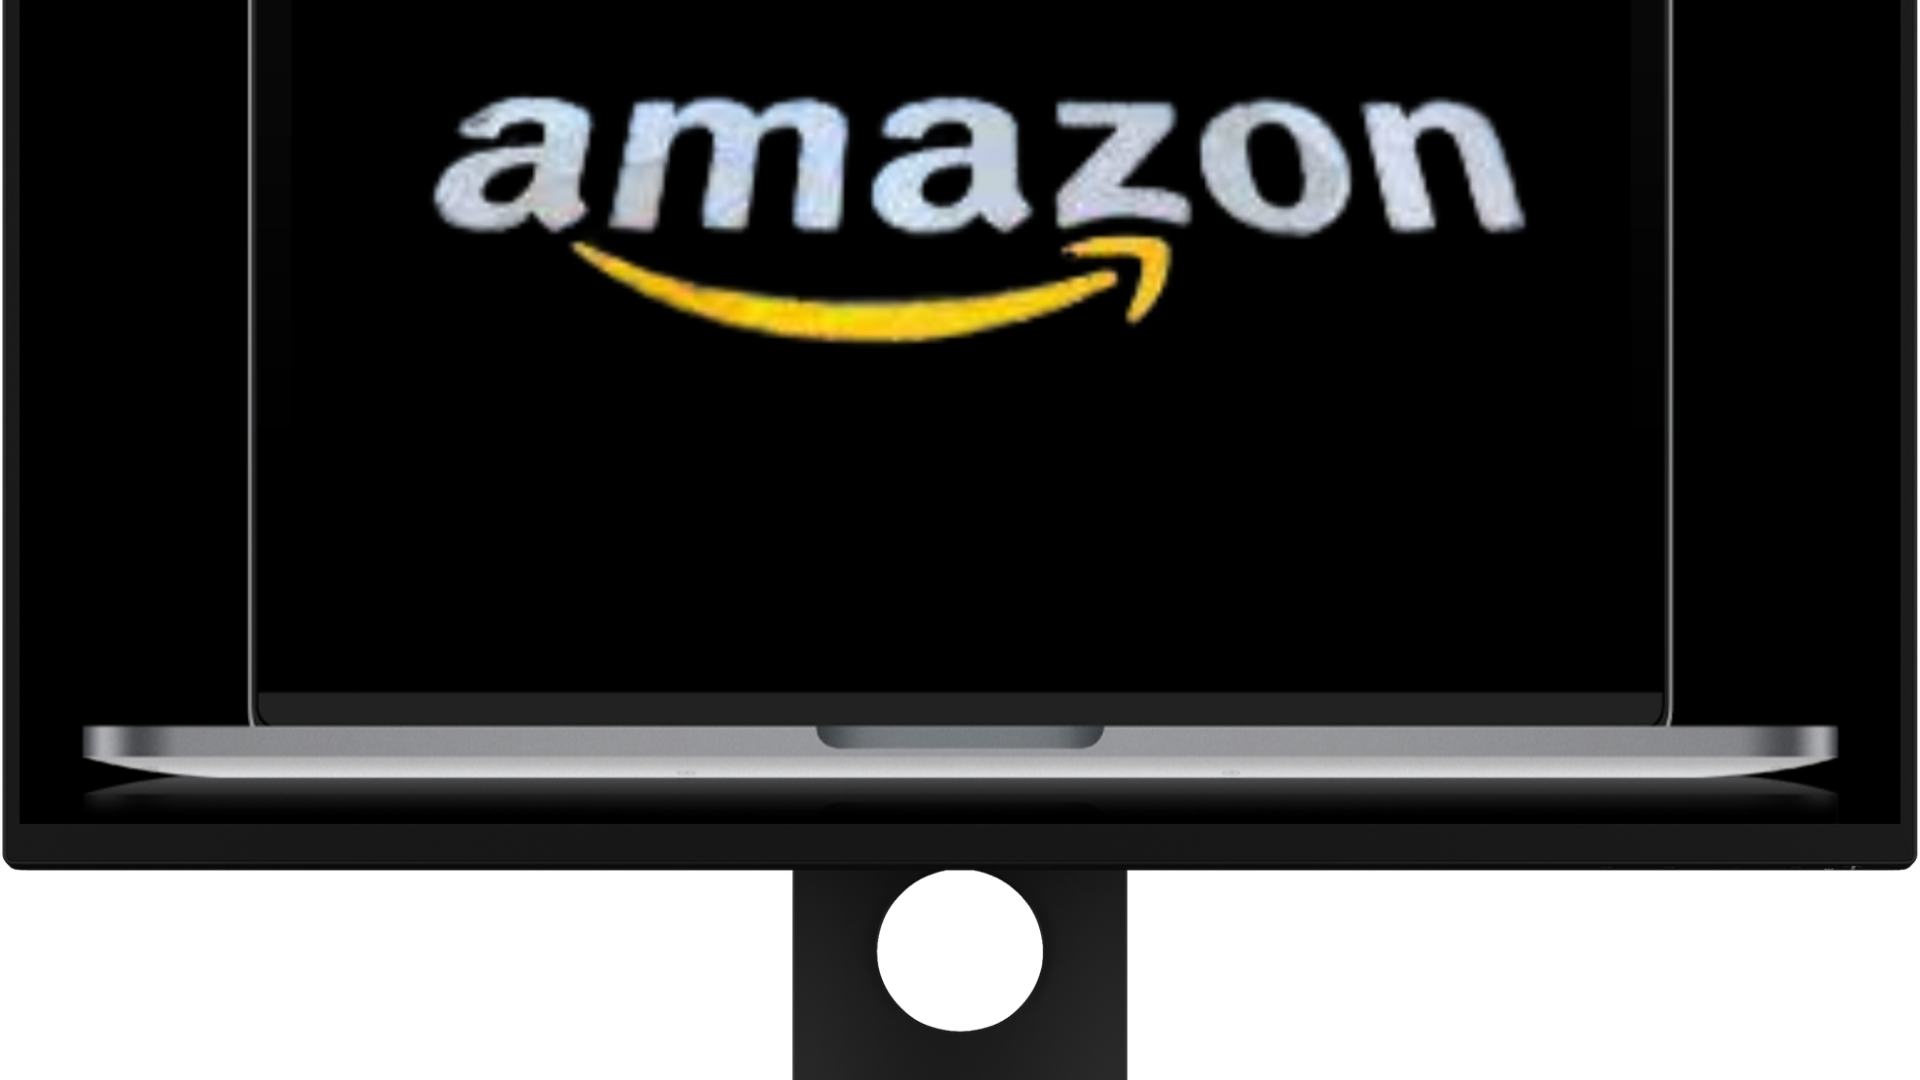 List of products on Amazon